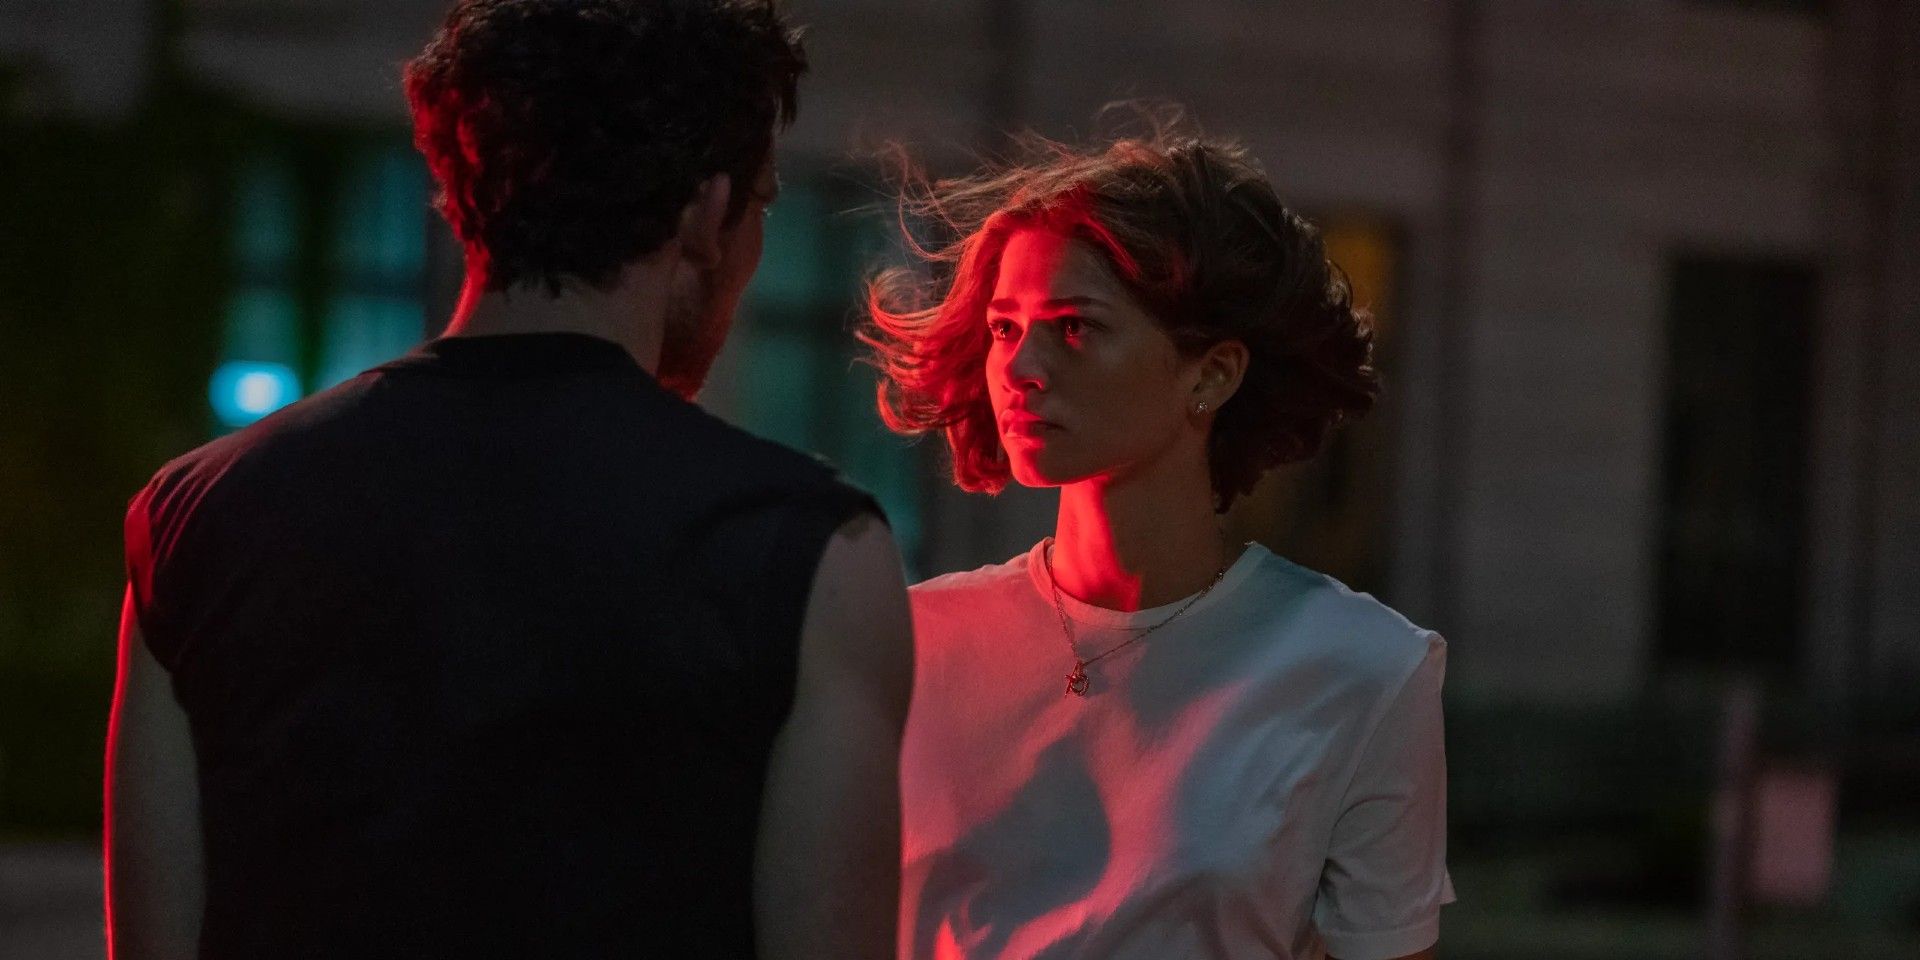 New $53 Million Hit Makes An Upcoming Jennifer Lawrence Movie Even More Promising